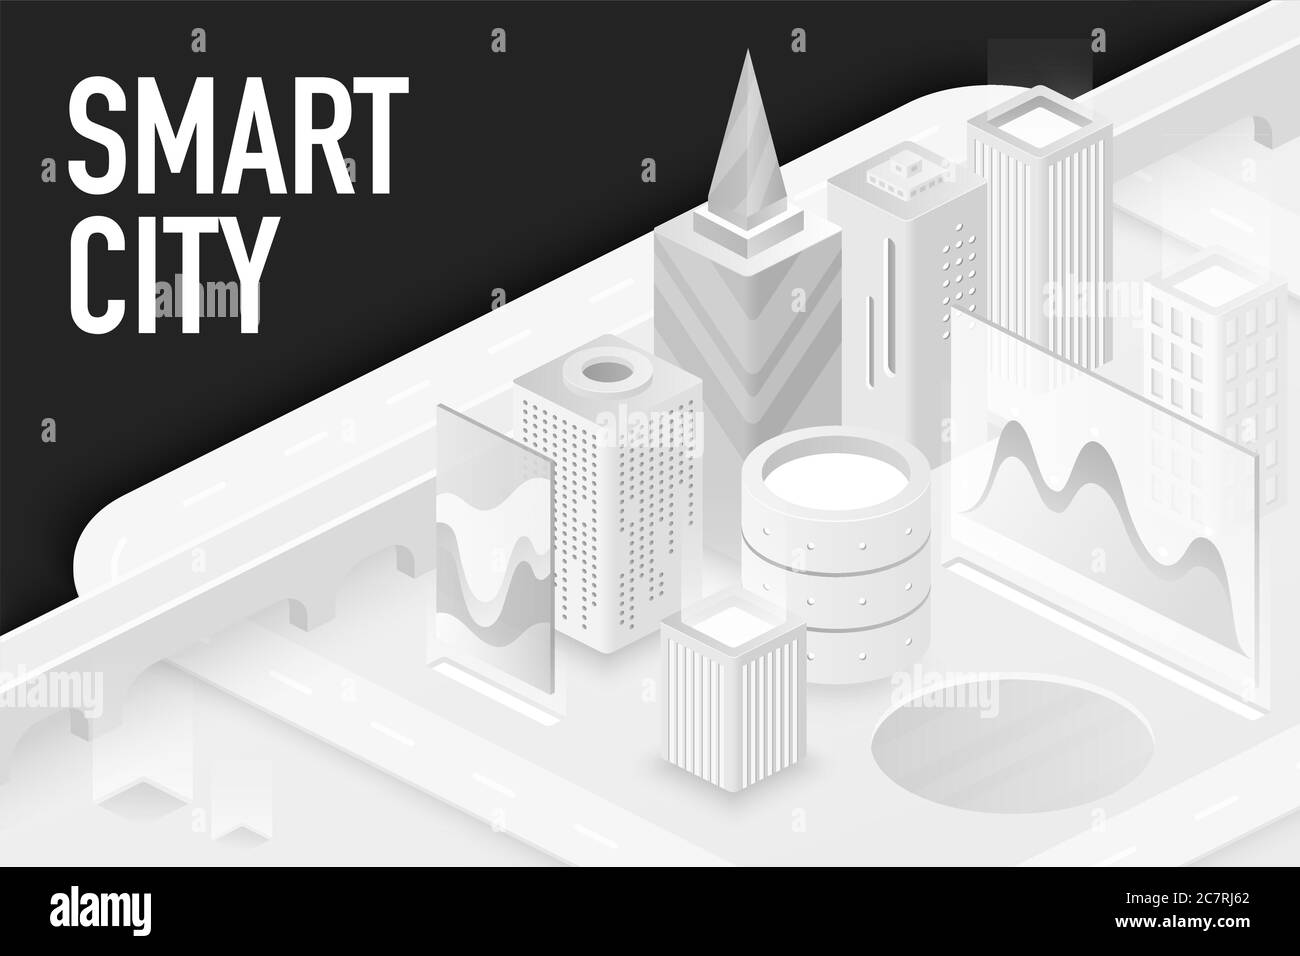 Smart city isometric banner vector template. Modern architecture, futuristic technology poster concept. Urban infrastructure innovation. Sustainable metropolis 3D map illustration with typography Stock Vector